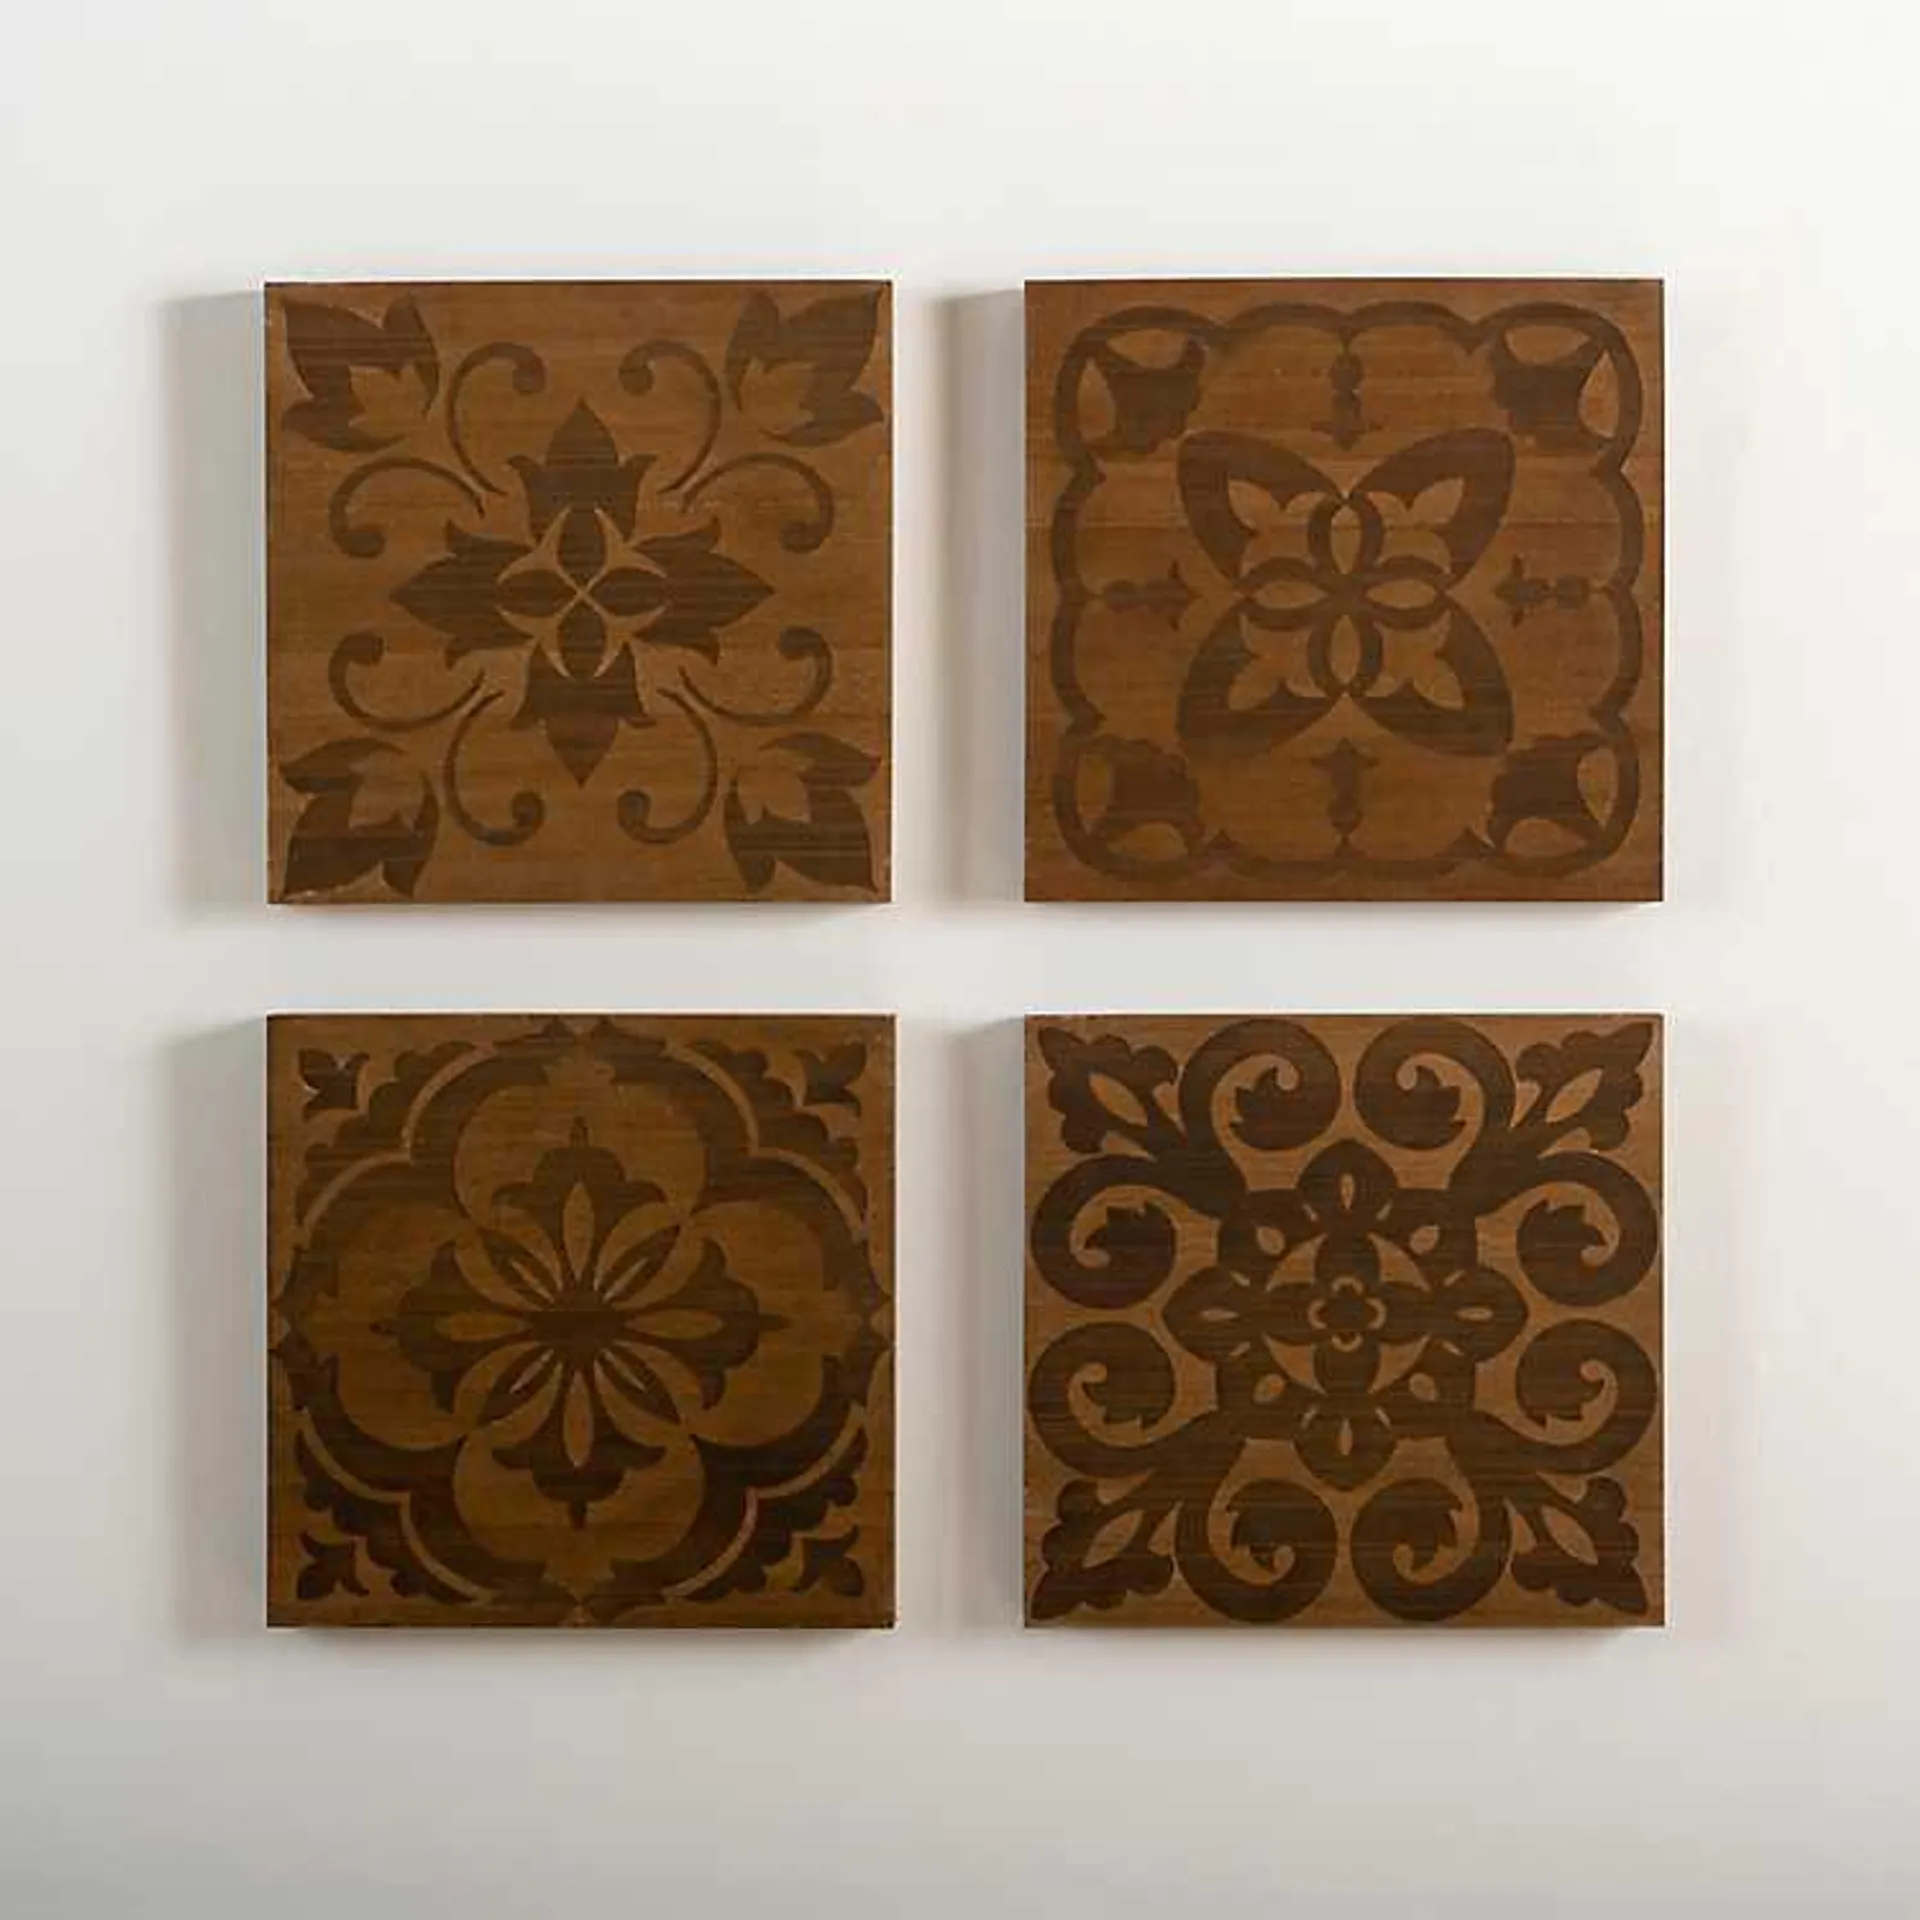 Carved Wood Patterned Wall Plaques, Set of 4